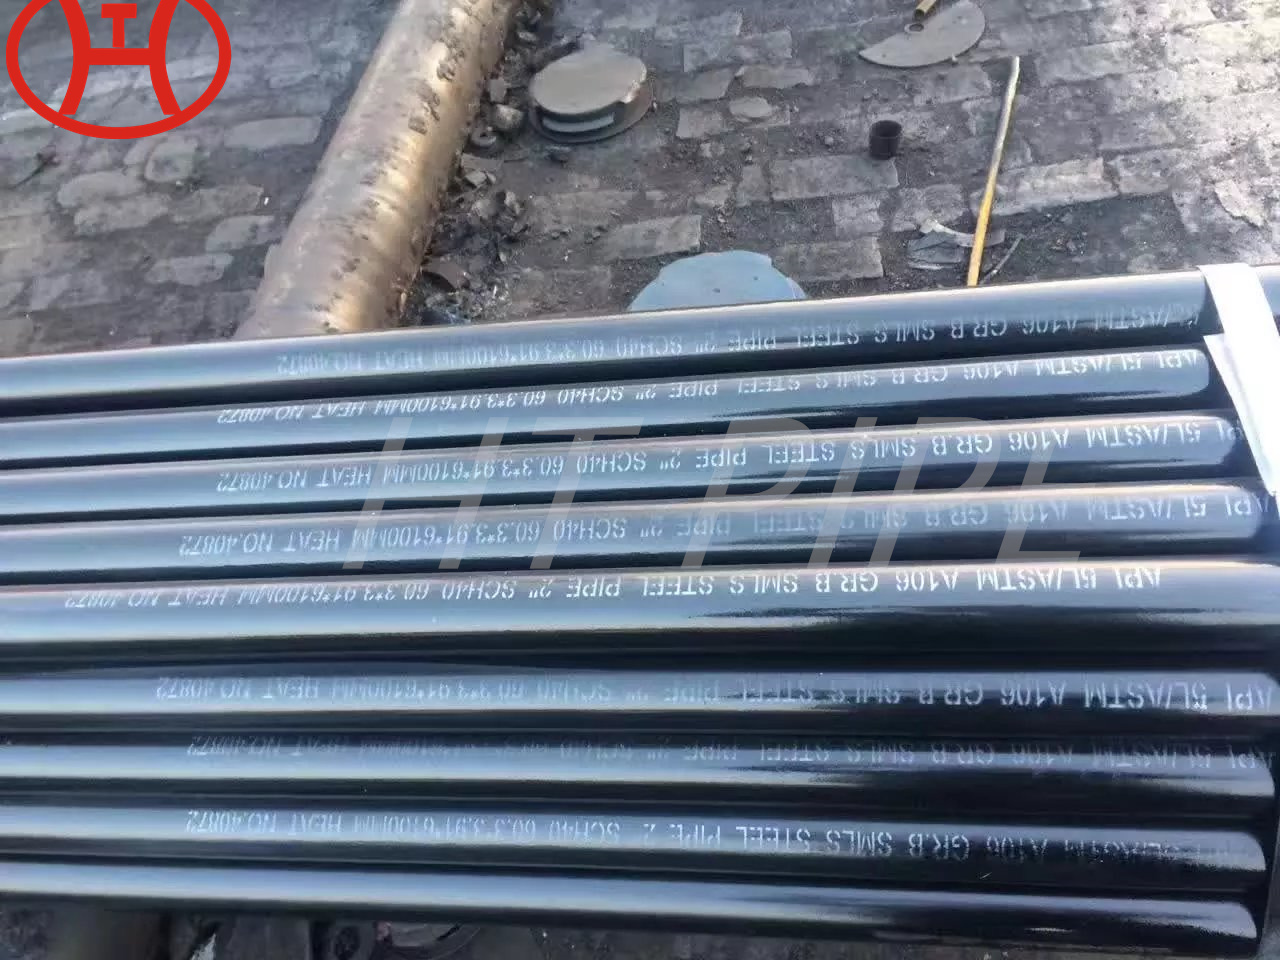 ASTM A335 P9 Seamless Steel Pipe Chrome Moly Pipe